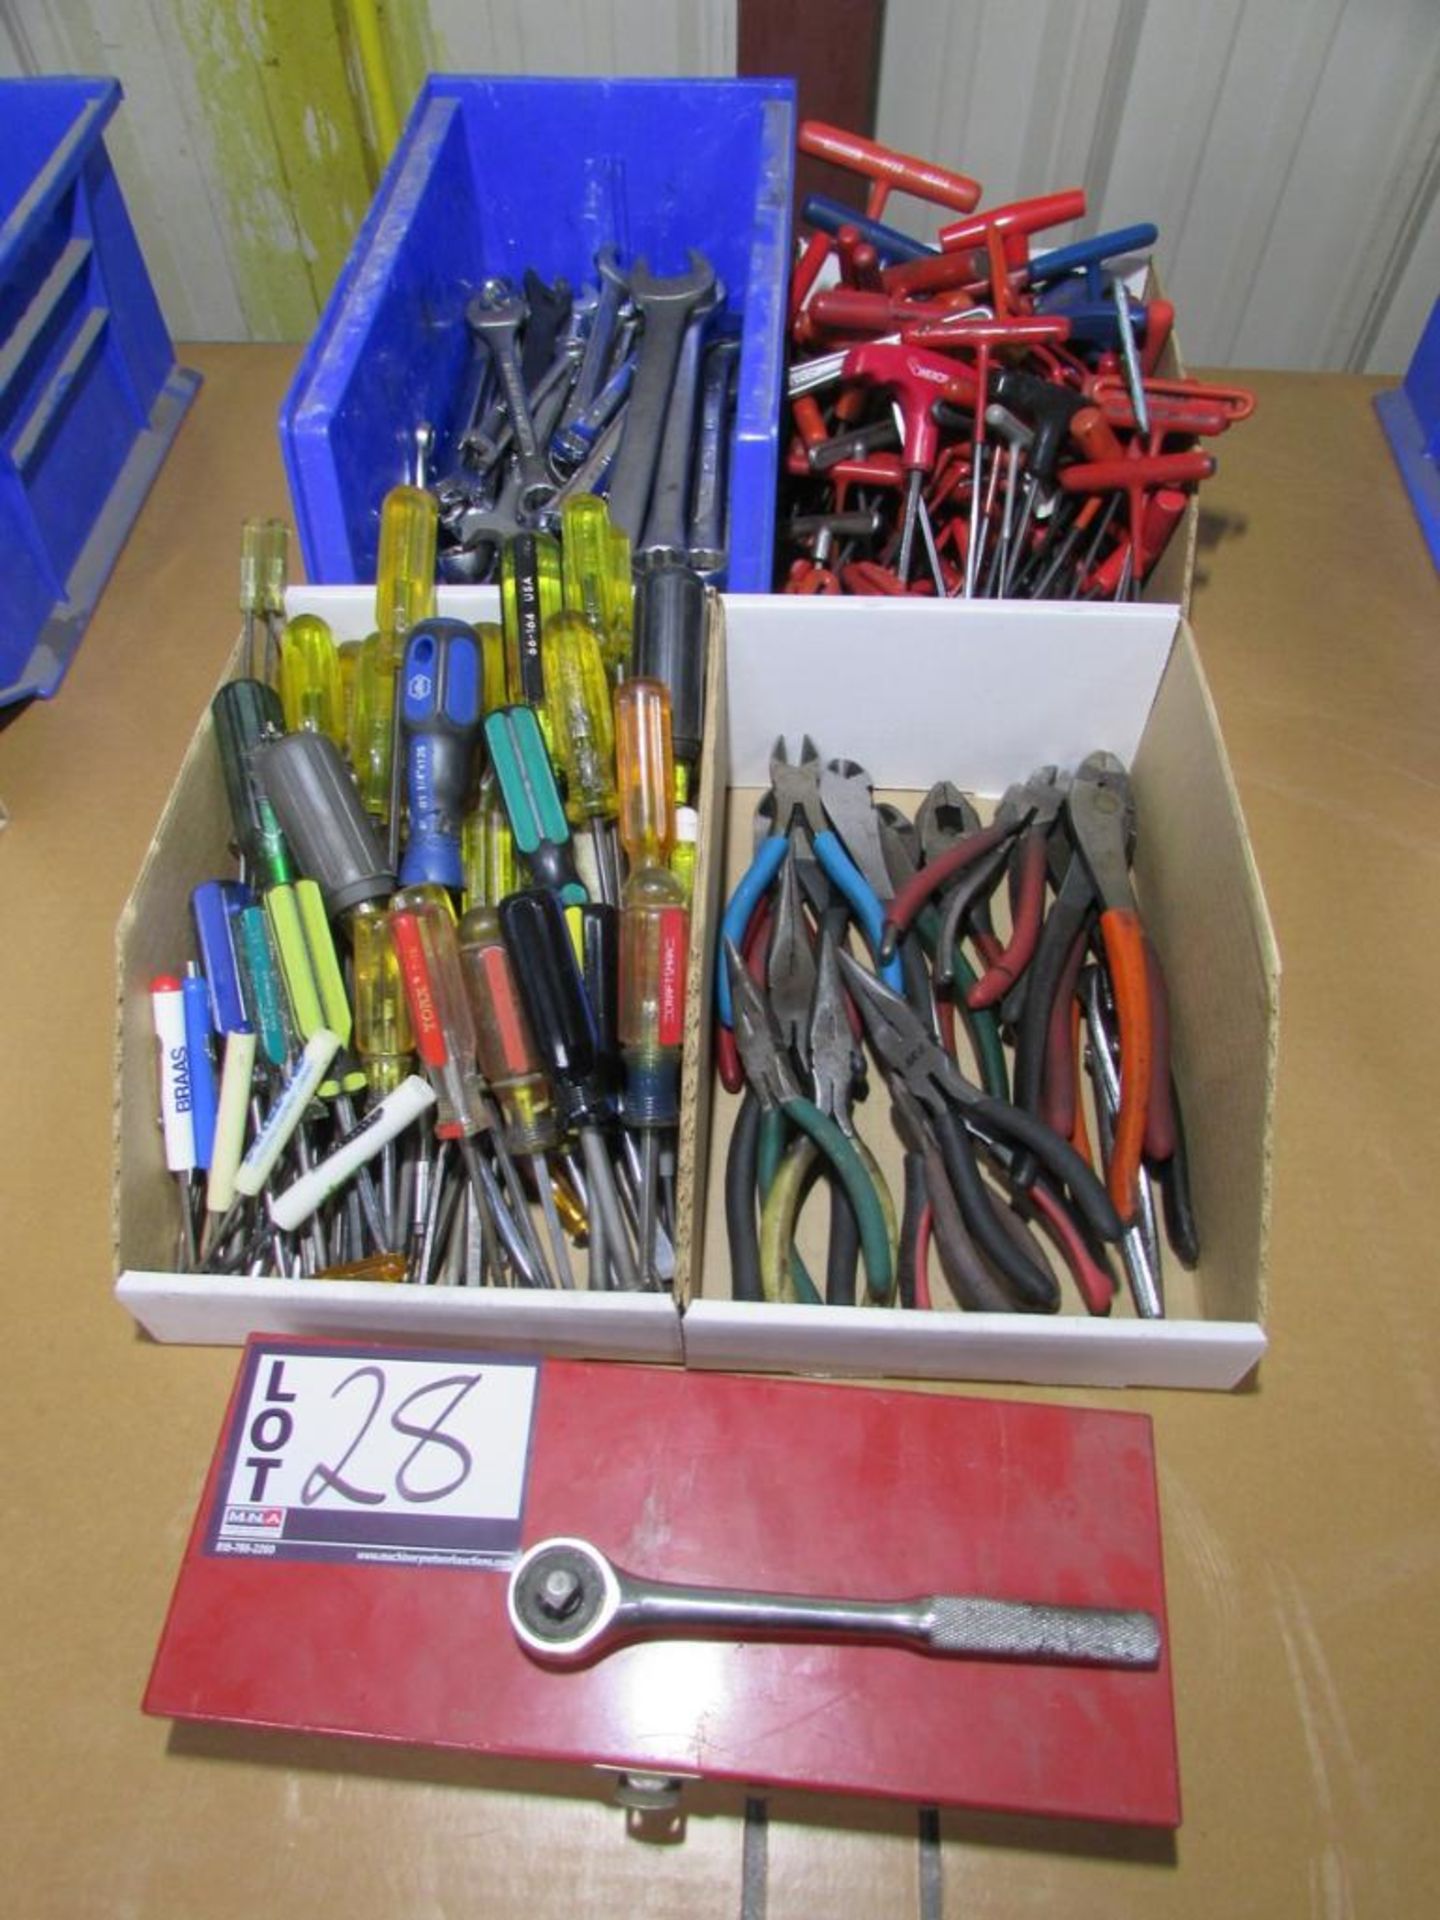 Assorted Hand Tools: Wrenches, Drivers, Allen Wrenches, Ratchet, Pliers, and Socket Set